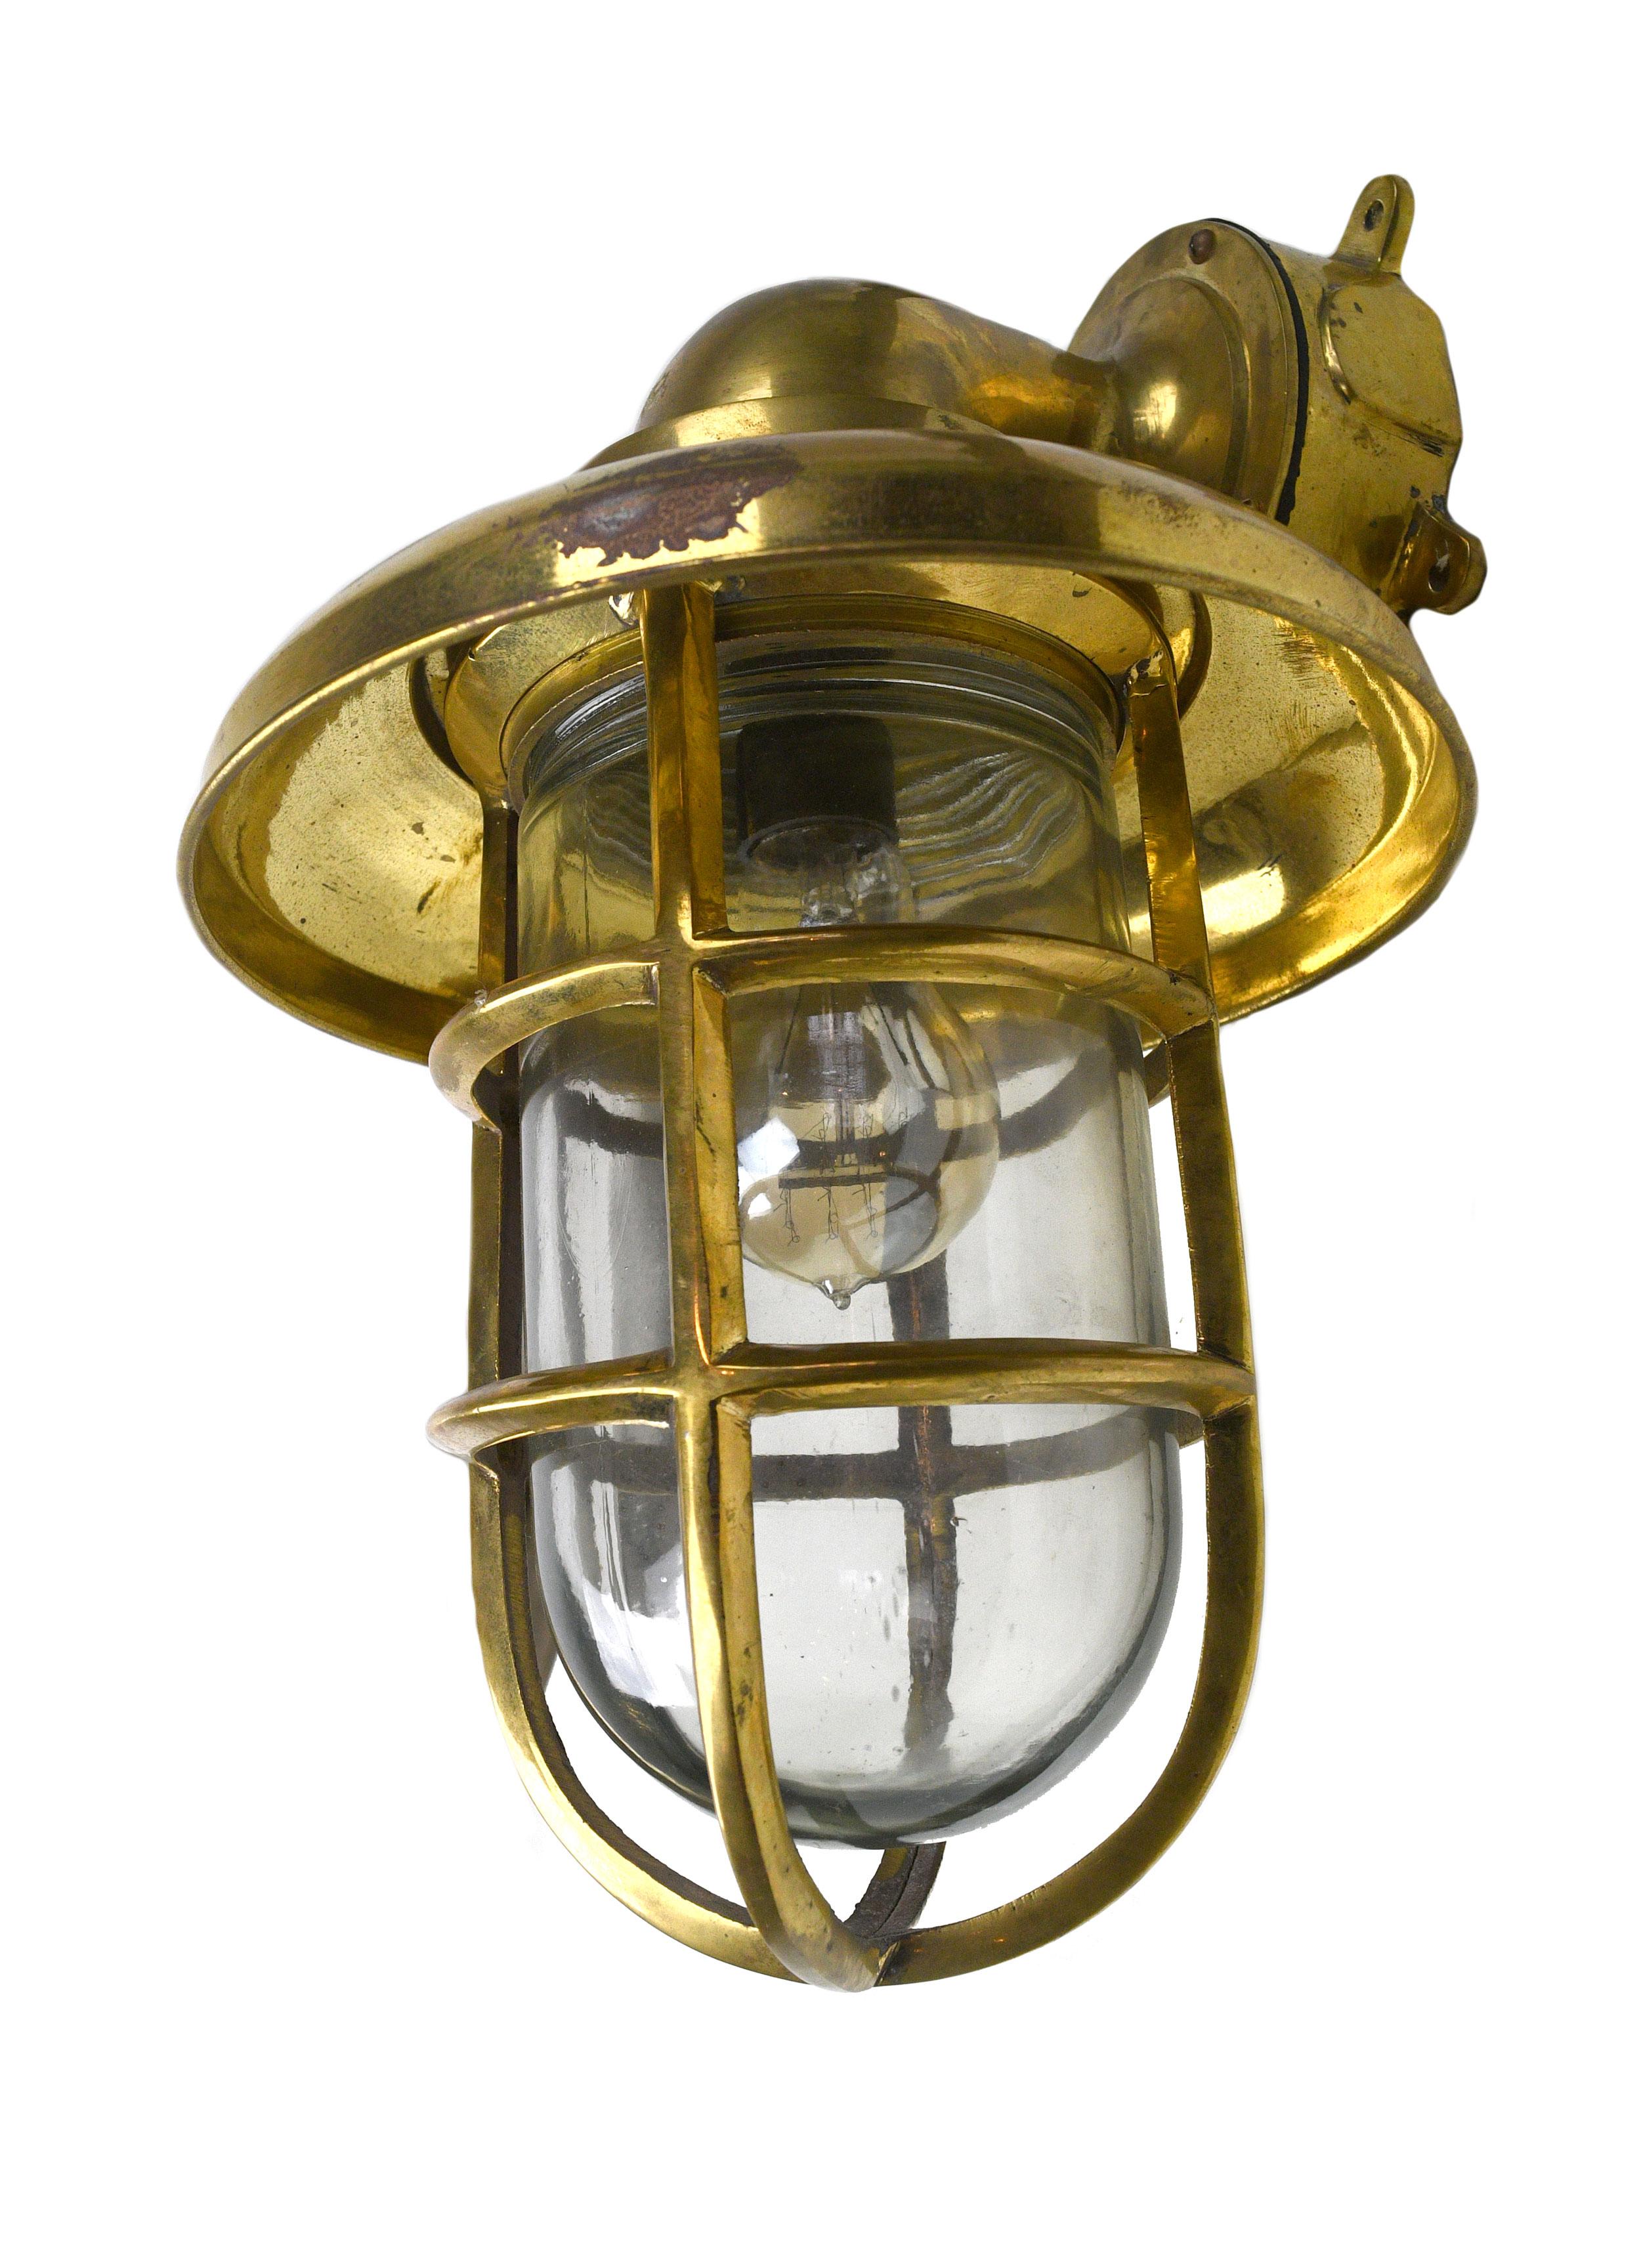 This wonderfully reflective brass and glass sconce features a look that is both Industrial and nautical. This sconce would bring an adventurous seafaring vibe to any space!